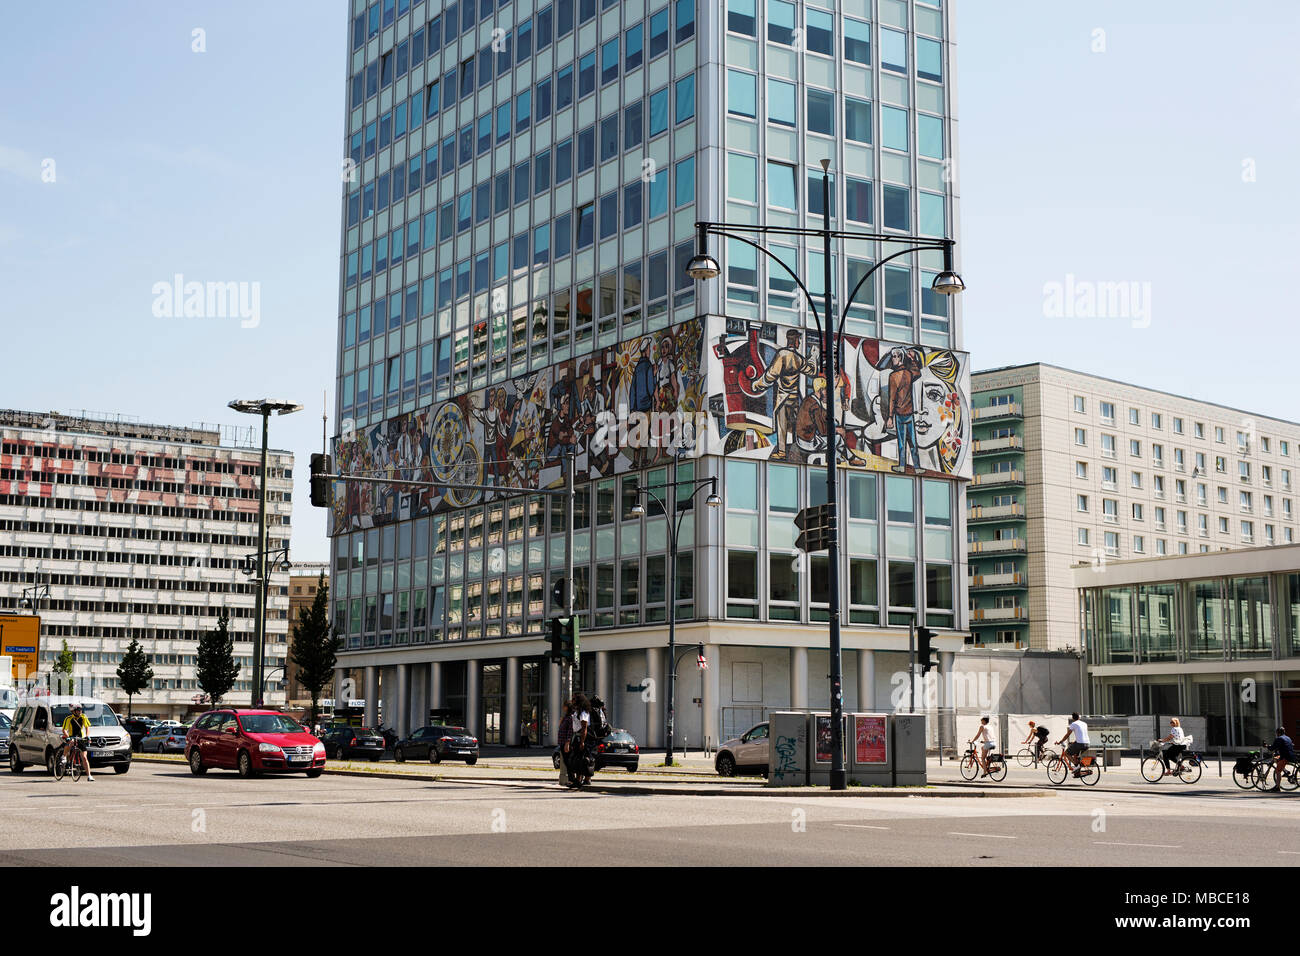 Haus des Lehrers (Teacher's House), a 1960s building featuring a Mexican-style mural in Alexanderplatz in Berlin, Germany. Stock Photo